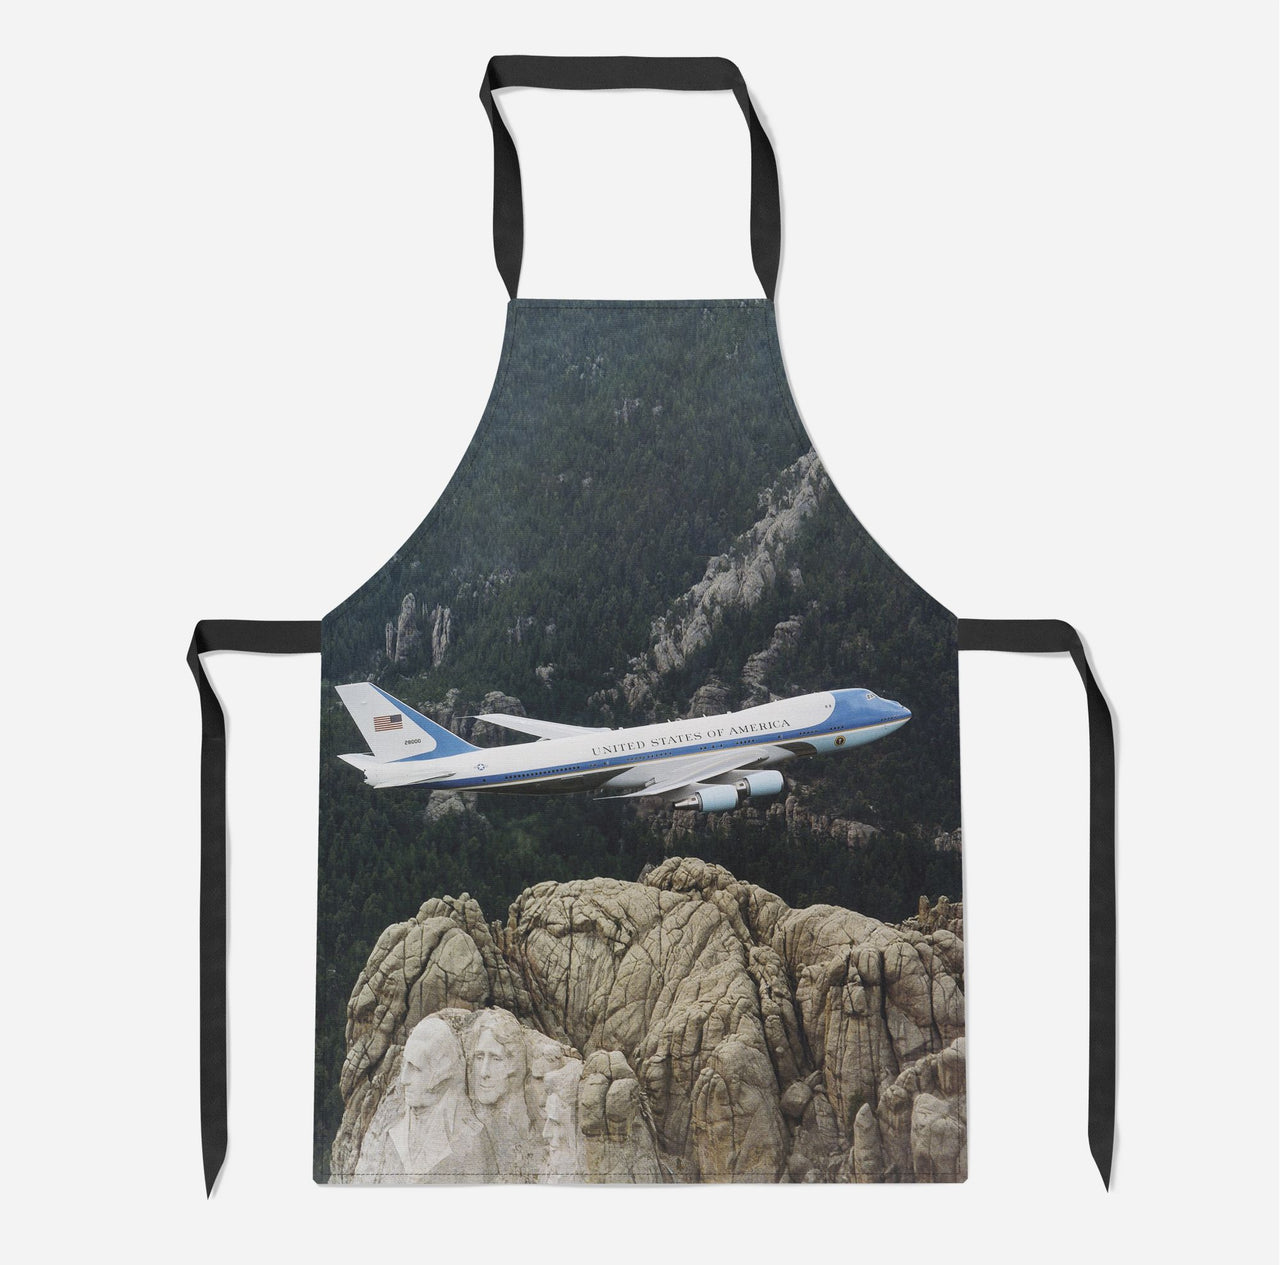 Cruising United States of America Boeing 747 Printed Pillows Designed Kitchen Aprons